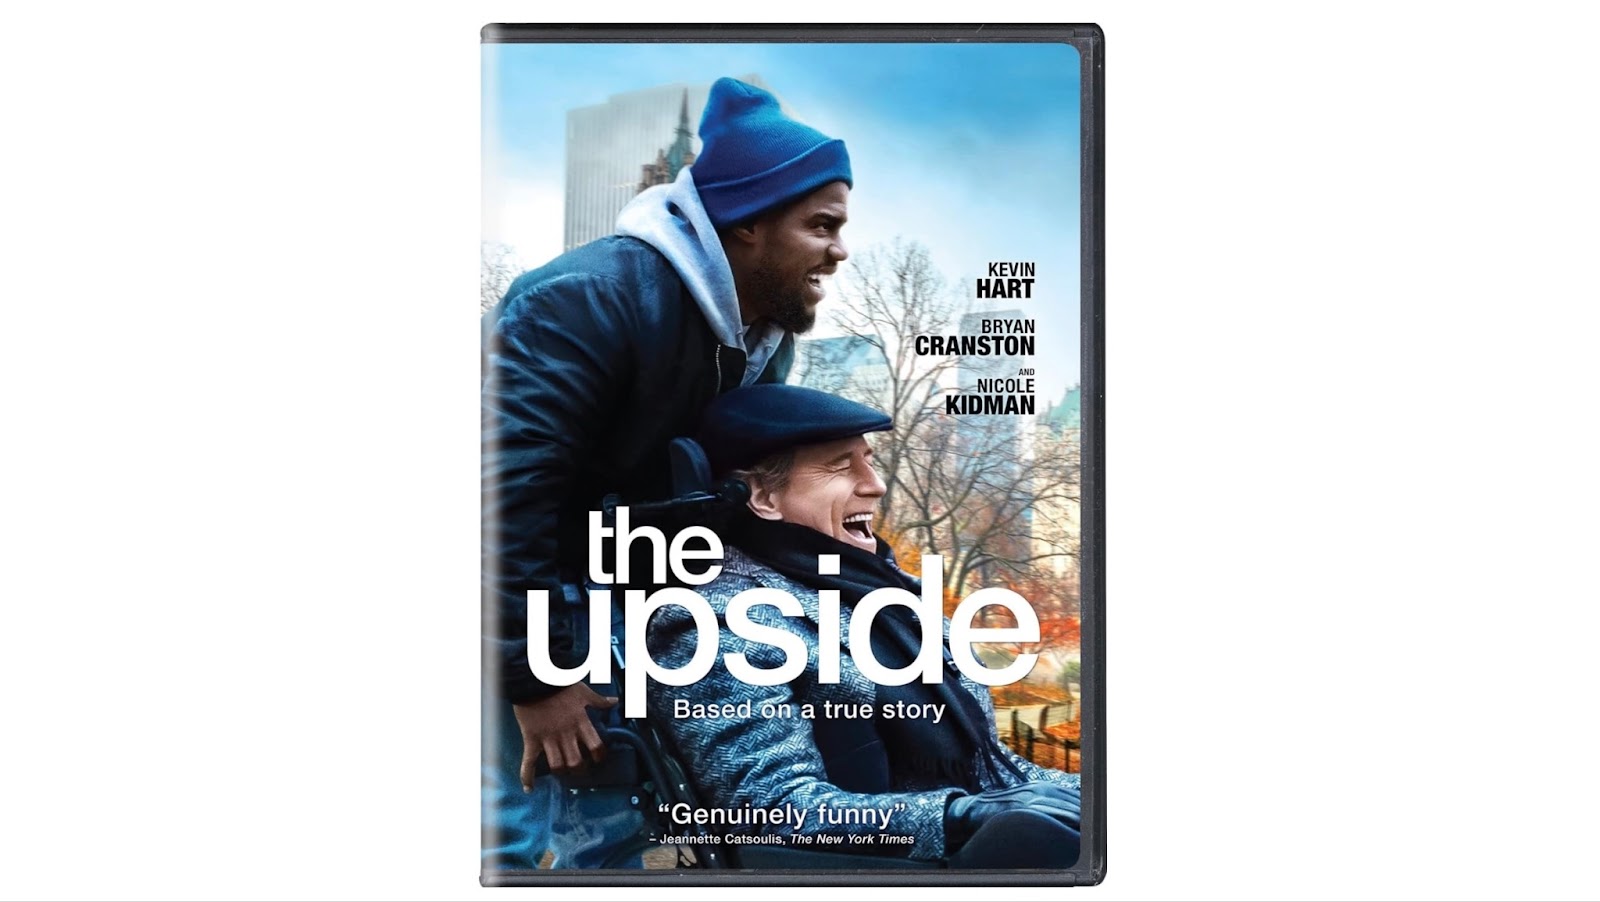 The Upside movie cover on white background